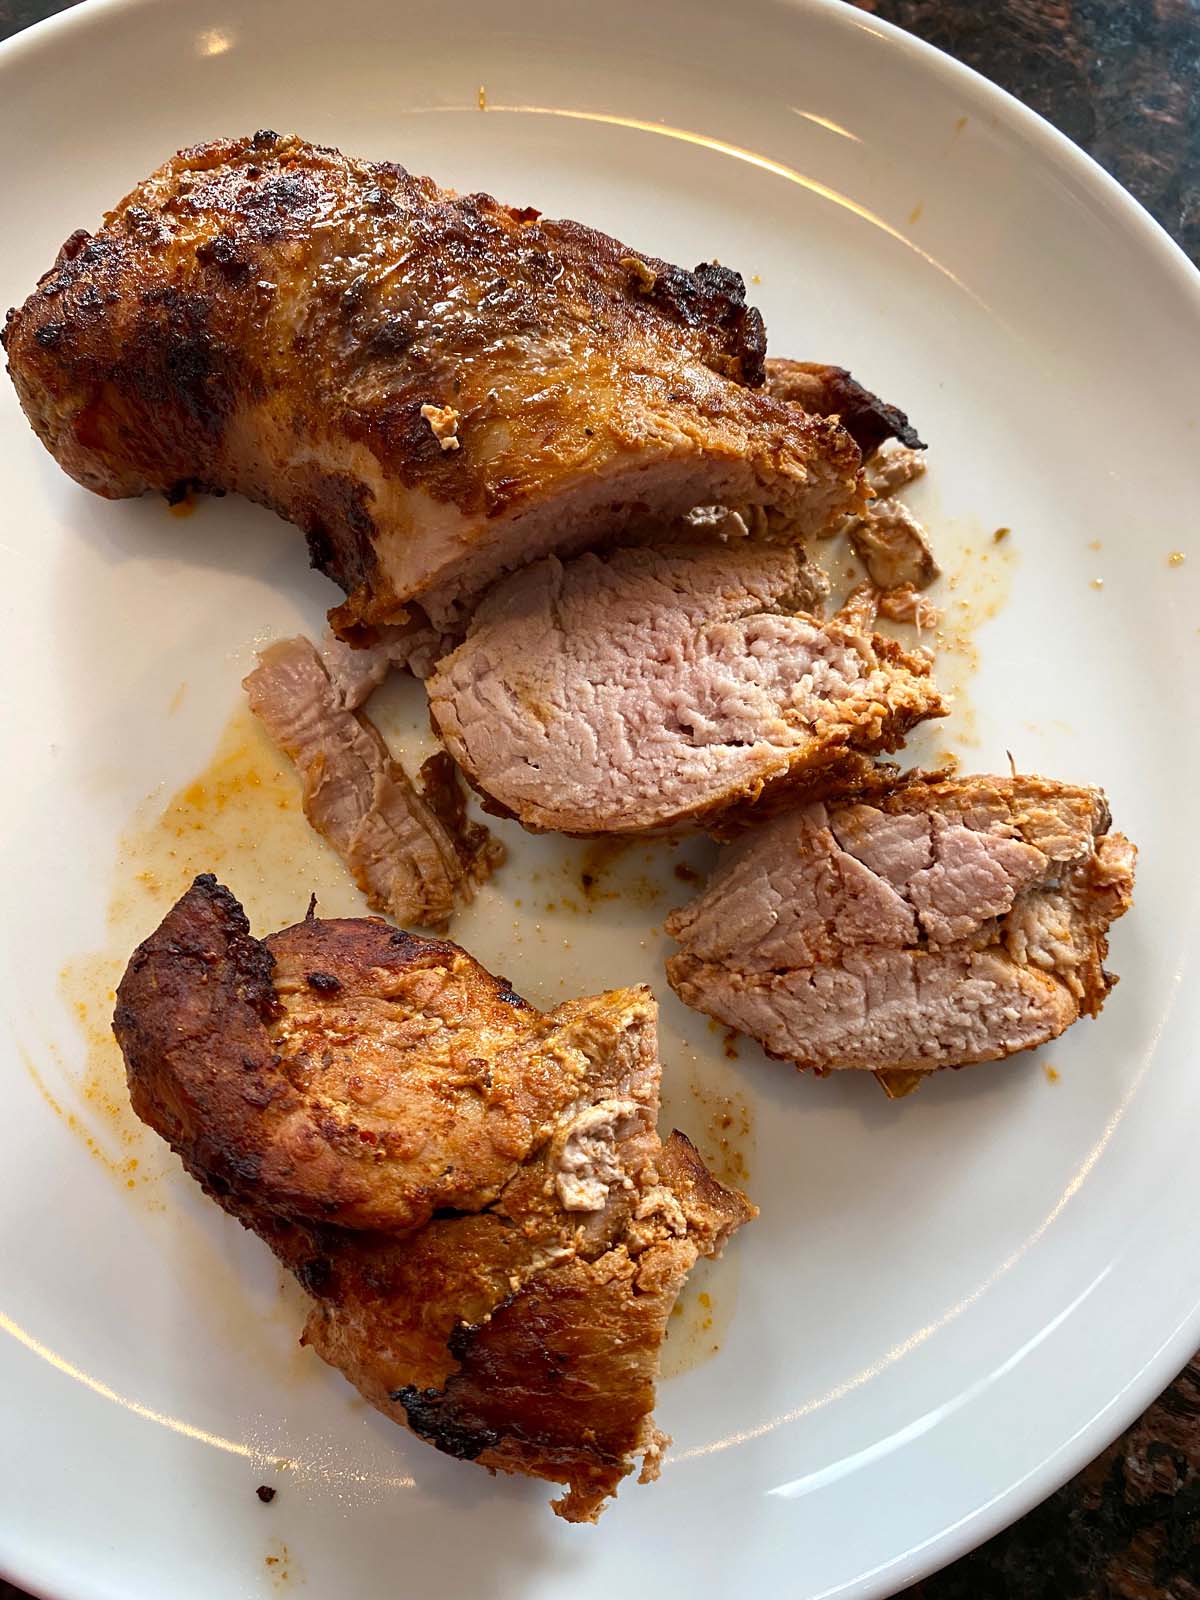 Pork tenderloin with a crispy crust and juicy inside with a few slices cut.